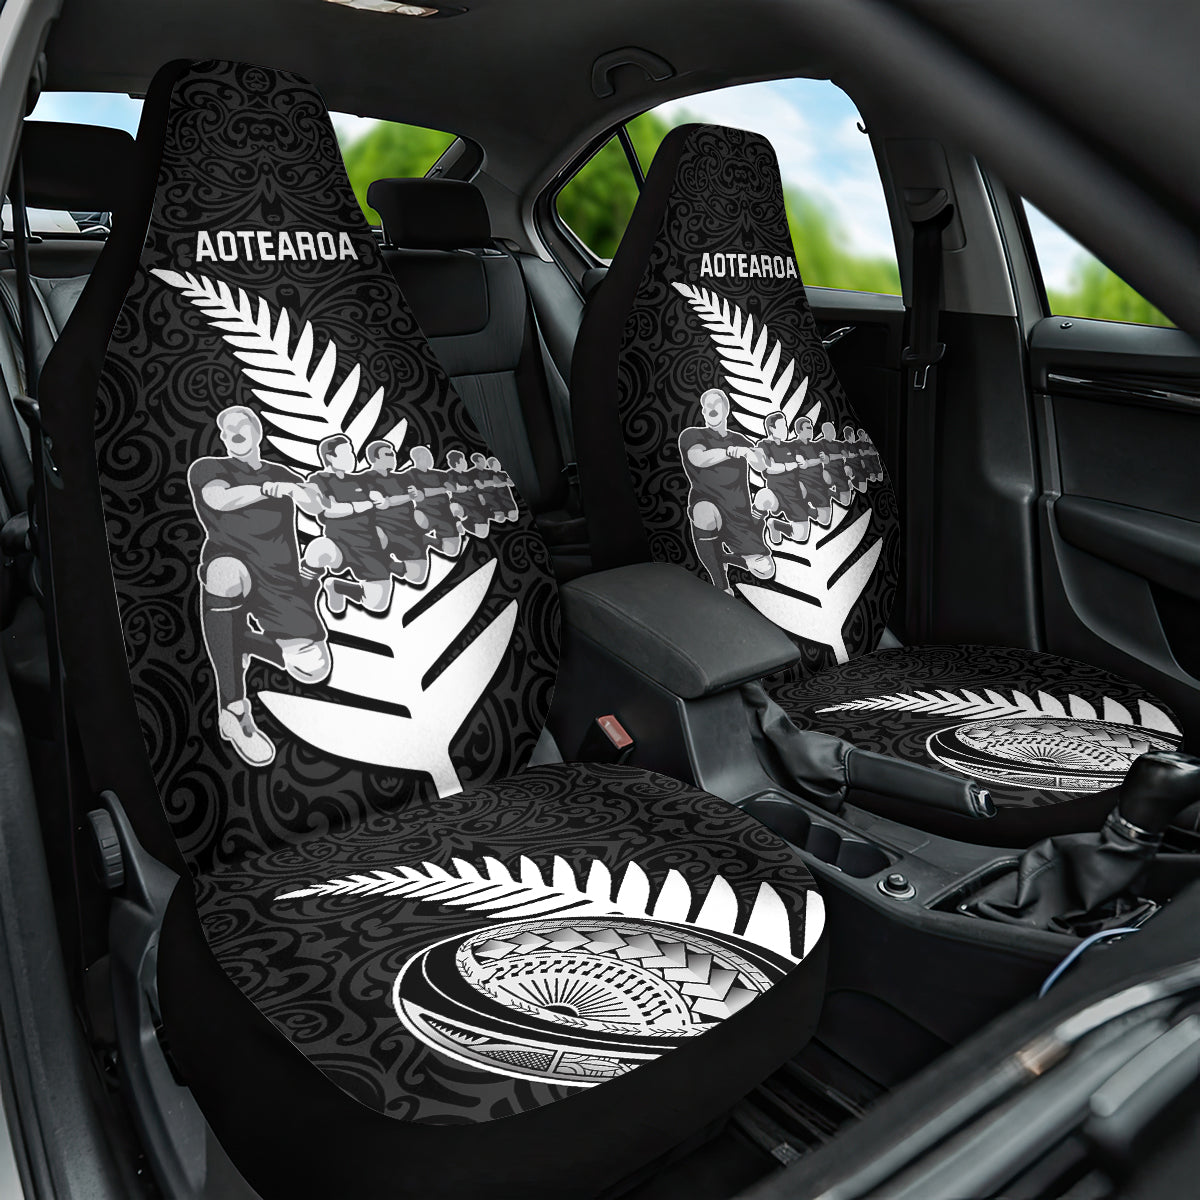 New Zealand World Cup 2023 Car Seat Cover Aotearoa Haka Rugby with Silver Fern Maori Ethnic Pattern LT03 One Size Black - Polynesian Pride